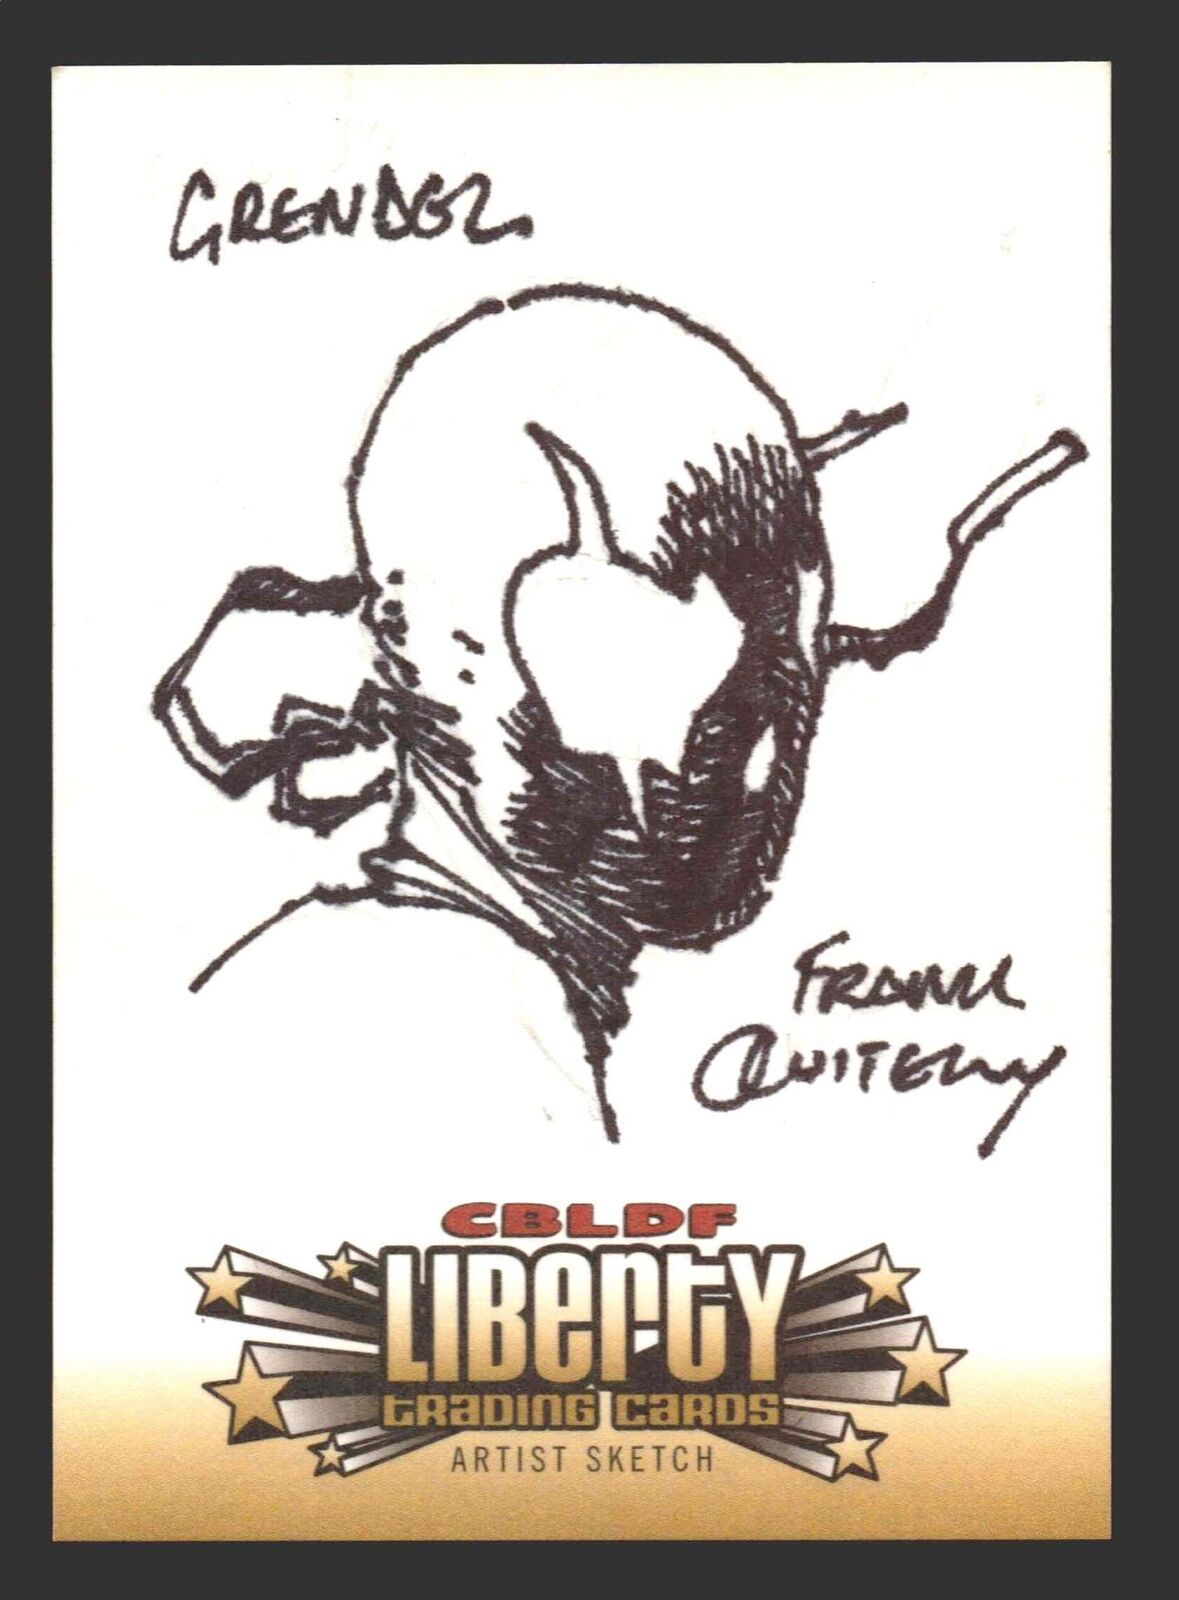 2011 Cryptozoic CBLDF Liberty Hand drawn Artist Sketch Card by Frank Quitely